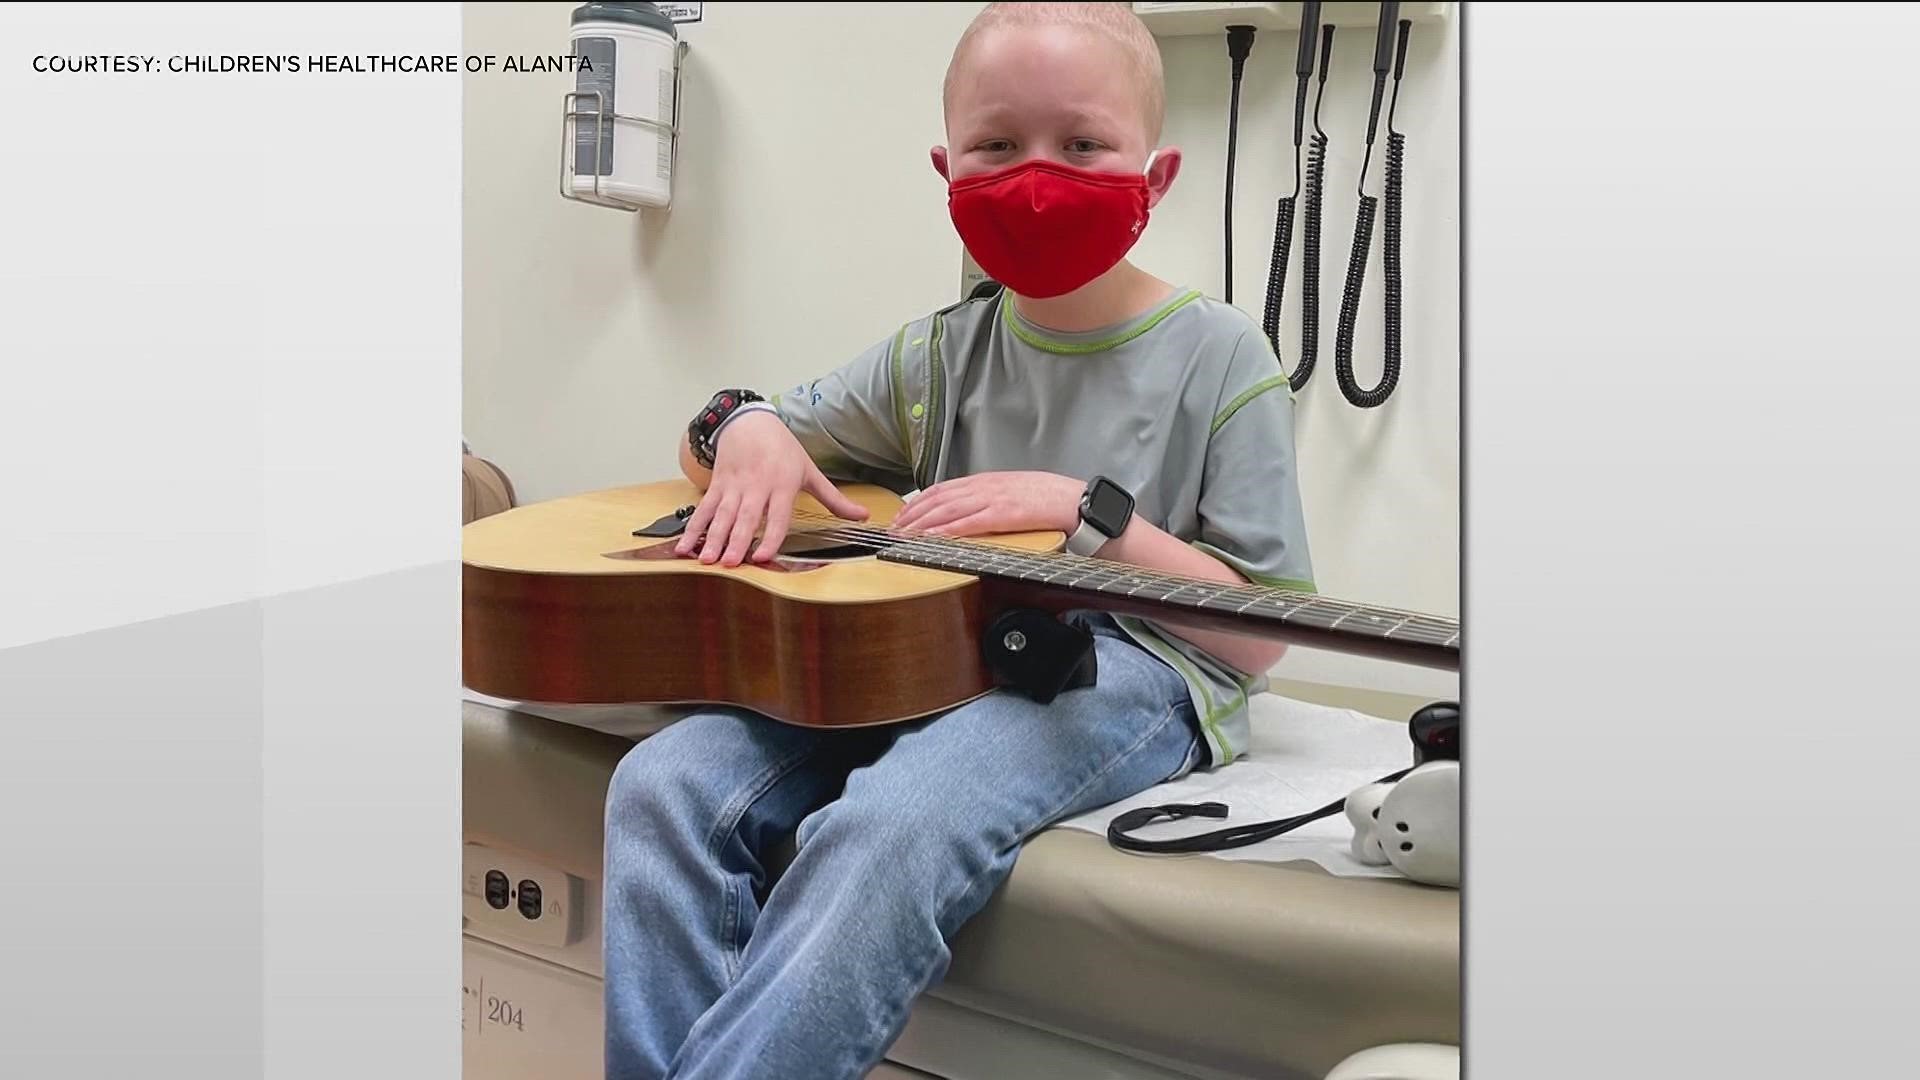 His parents said he lit up when the music therapy began and transformed his experience at the hospital.